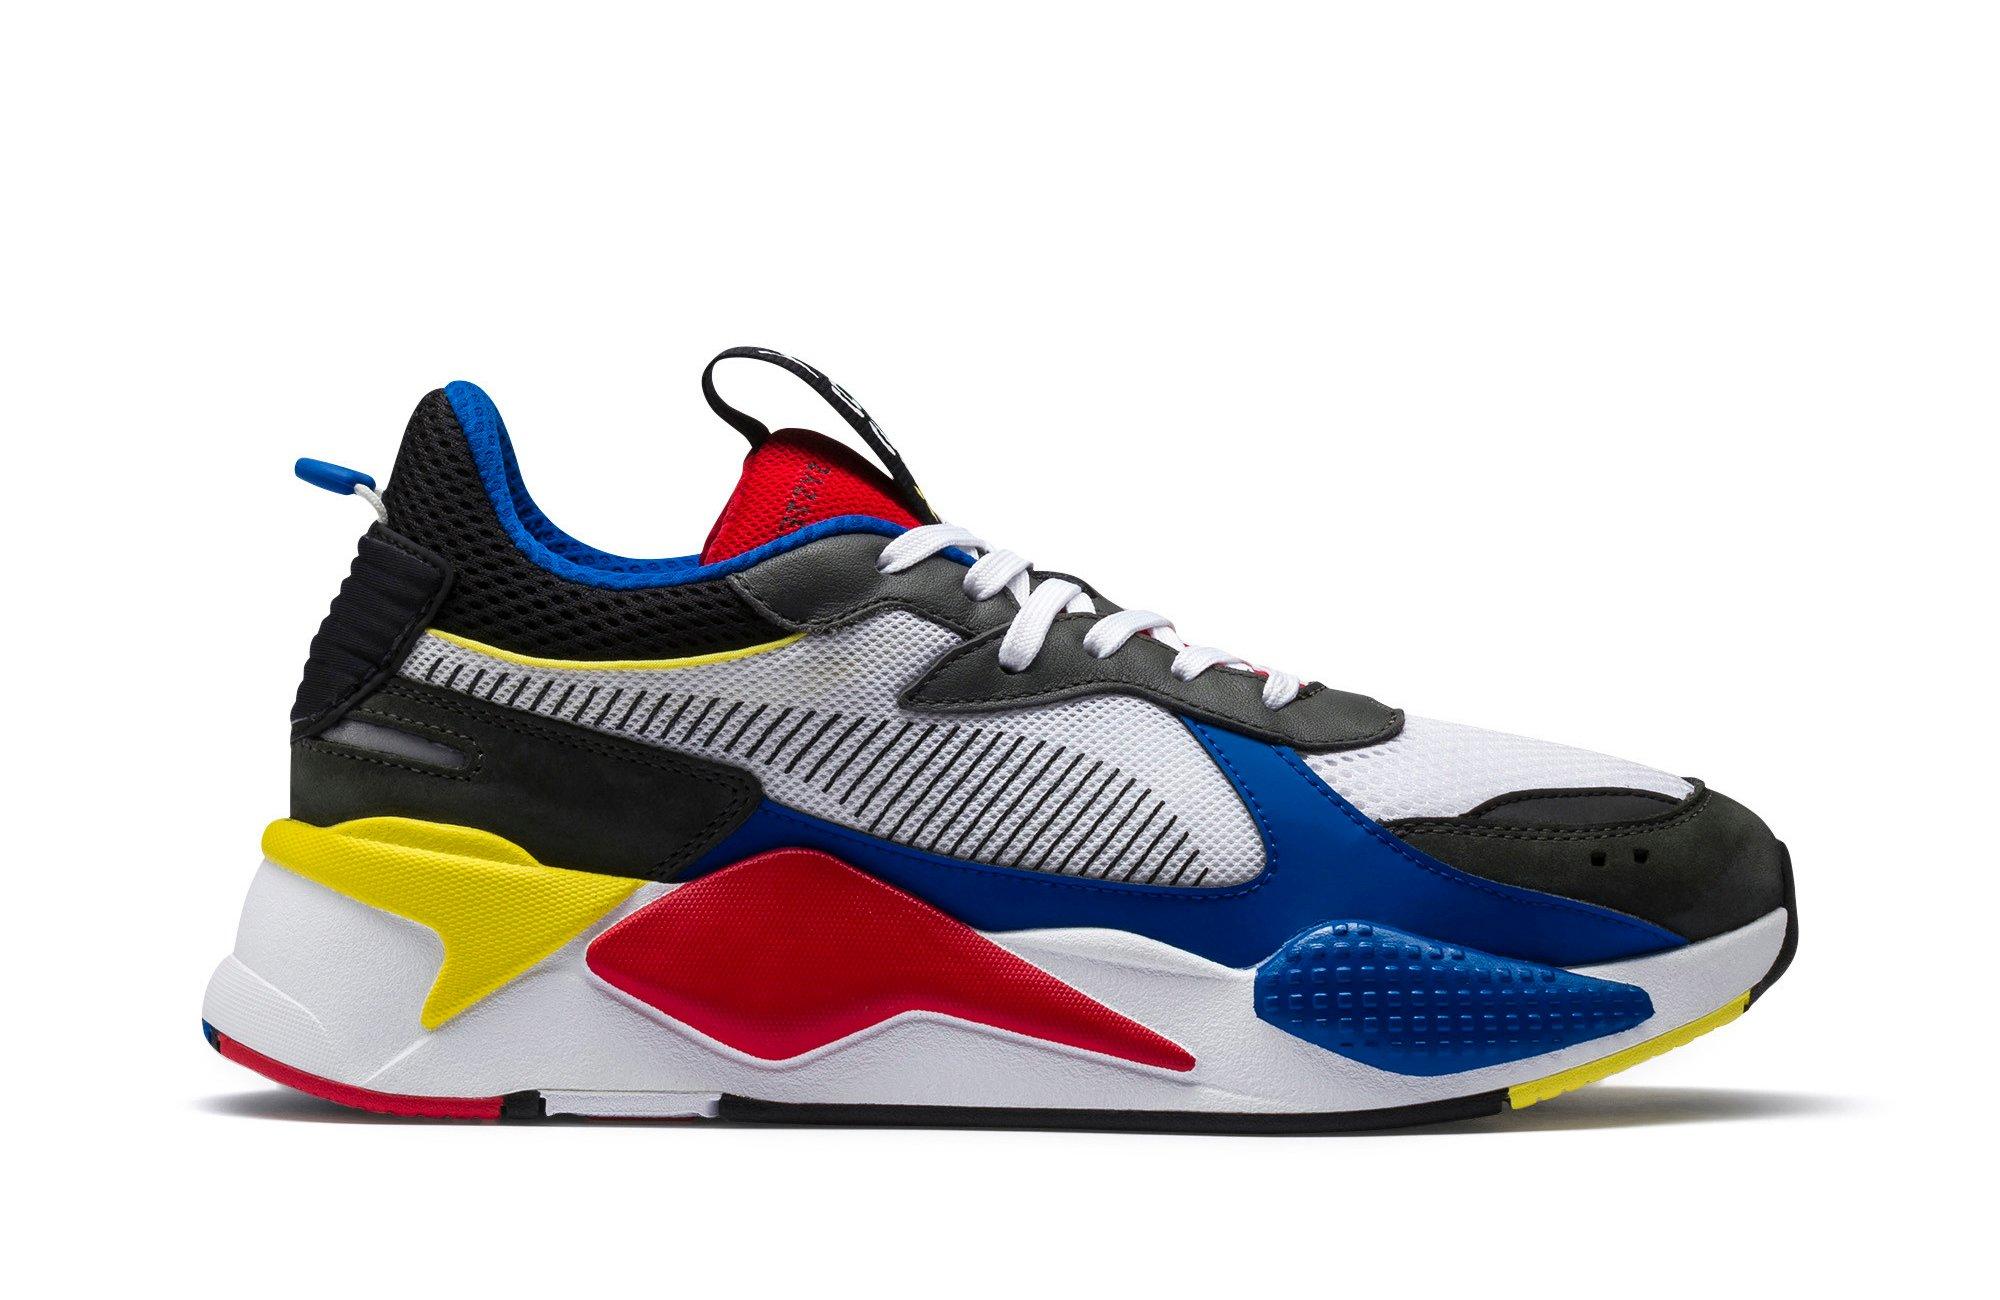 Sneakers Release- PUMA RS-X Toys “White/Red/Blue” Running Shoe